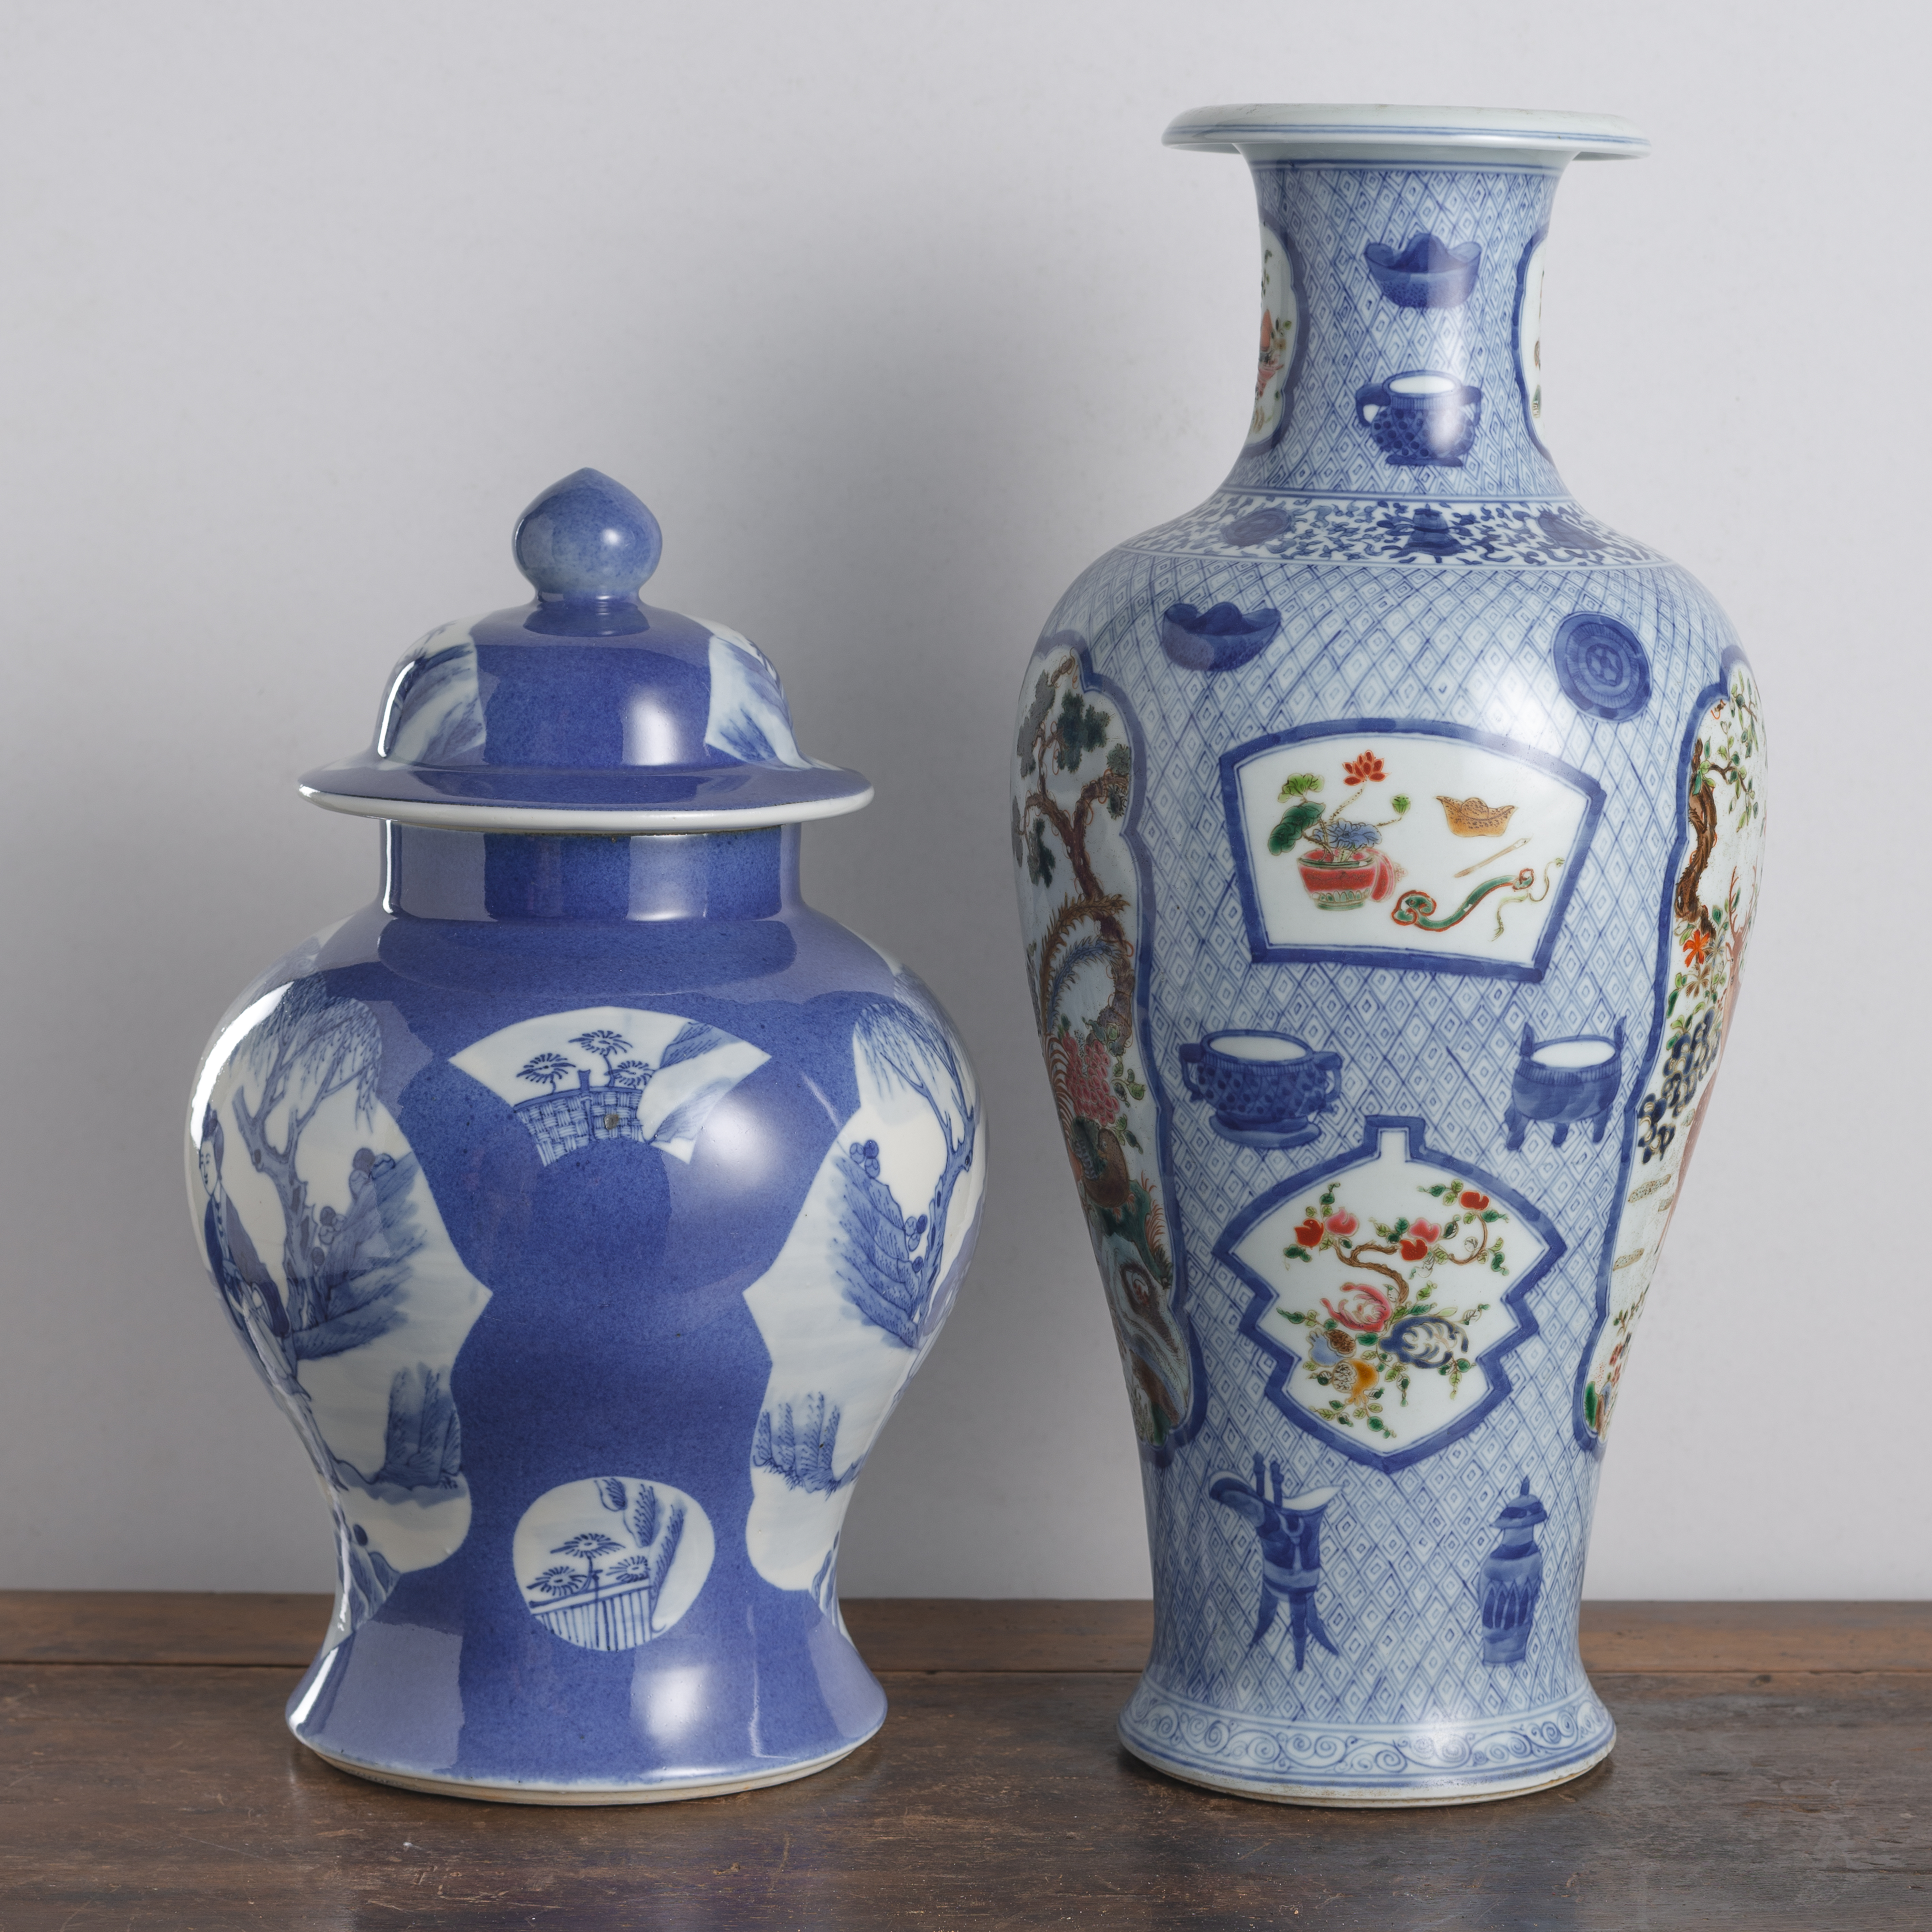 A POWDER-BLUE PORCELAIN VASE AND COVER AND A POLYCHROME DEER, PHEASANTS, AND BUDDHIST EMBLEMS BALUS - Image 4 of 6